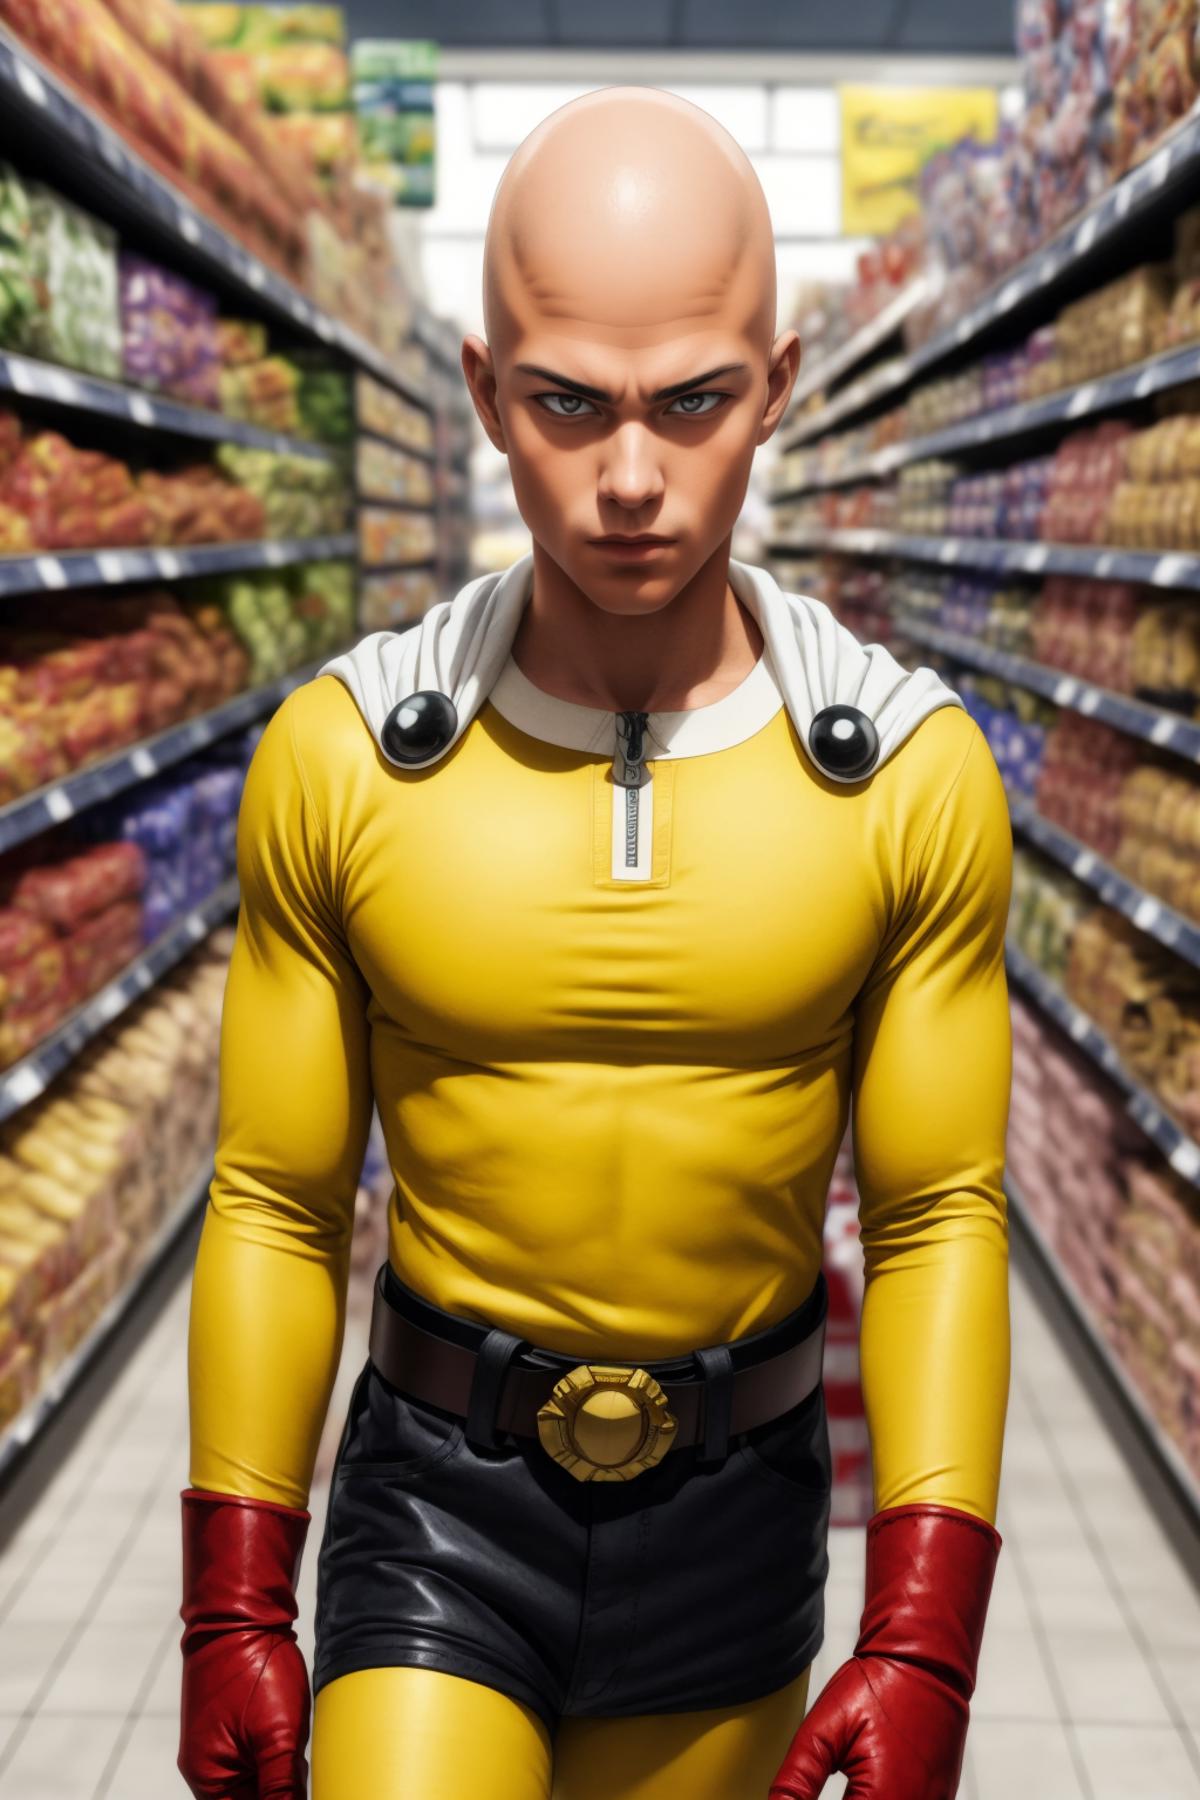 A Superhero Cartoon Character in a Grocery Store Aisle